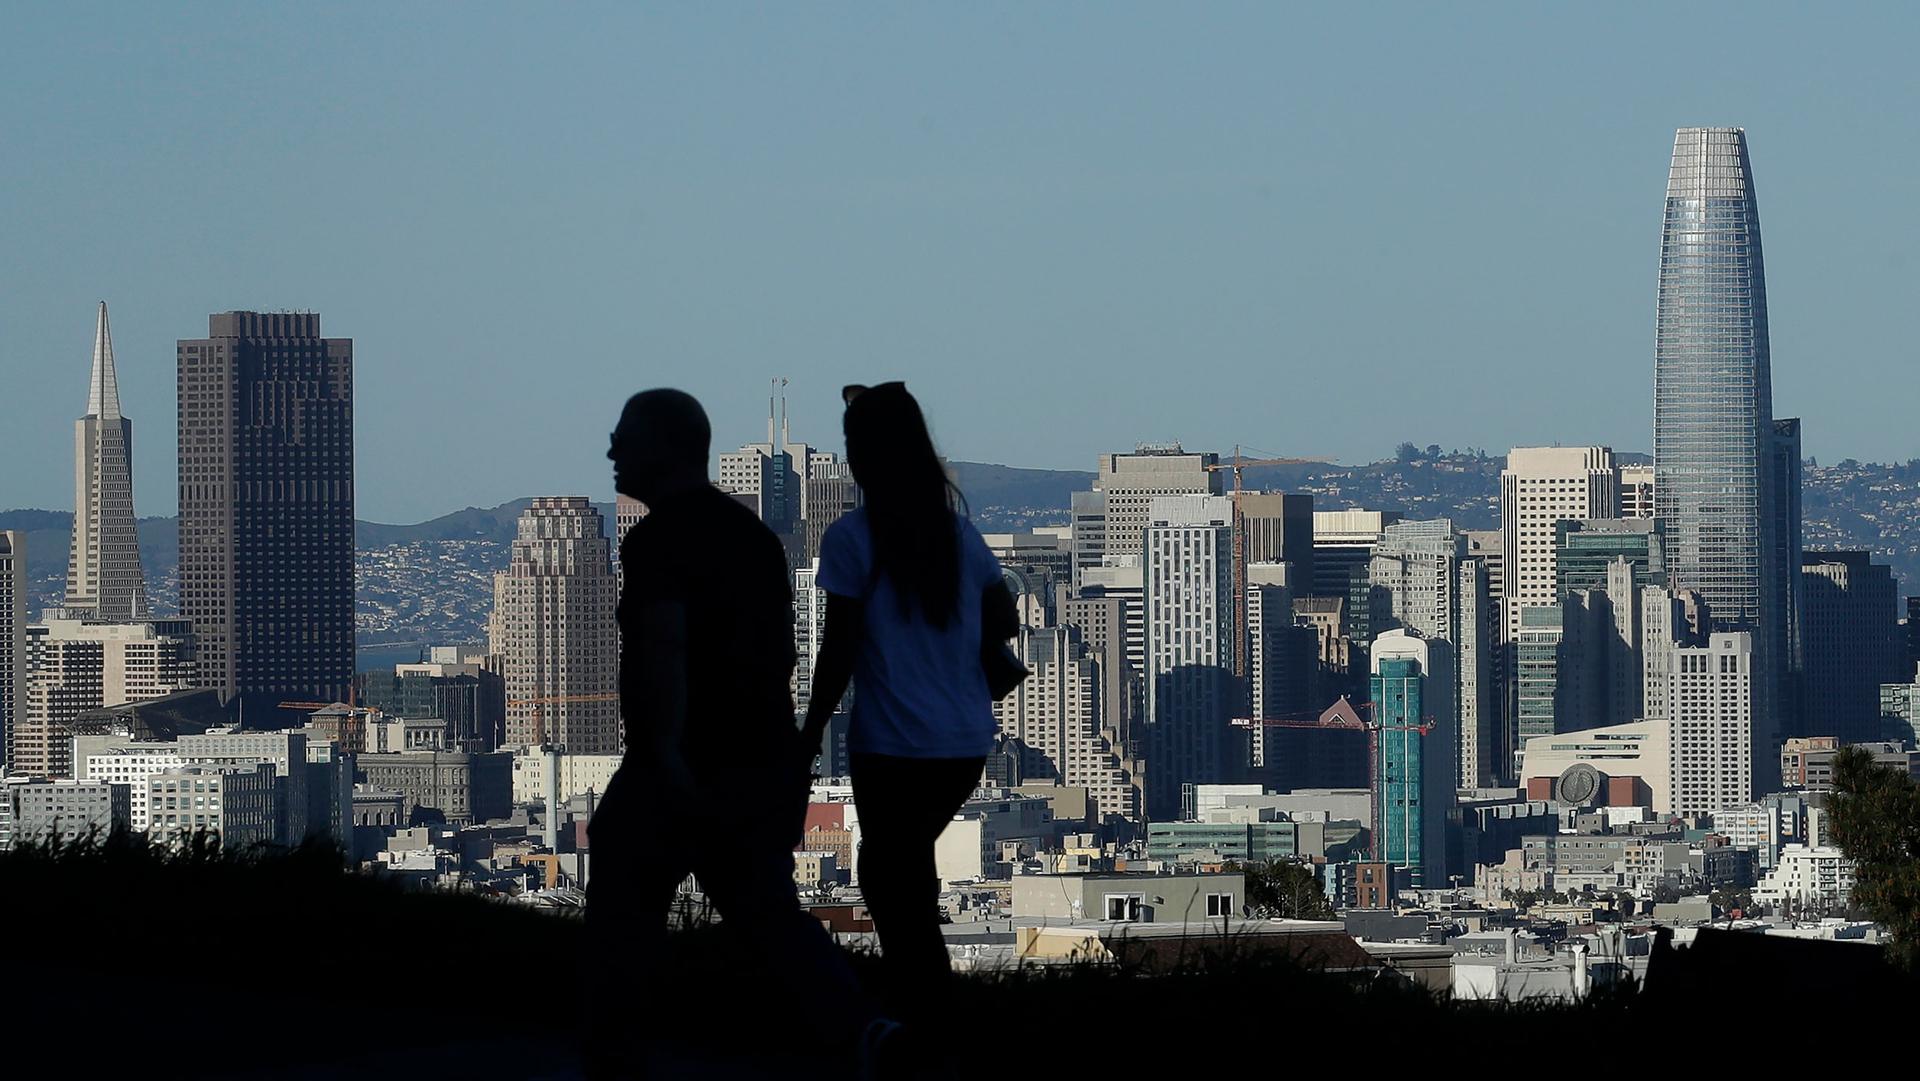 The downtown skyline of San Francisco is shown in the distance with a couple walking in the nearground in shadown.